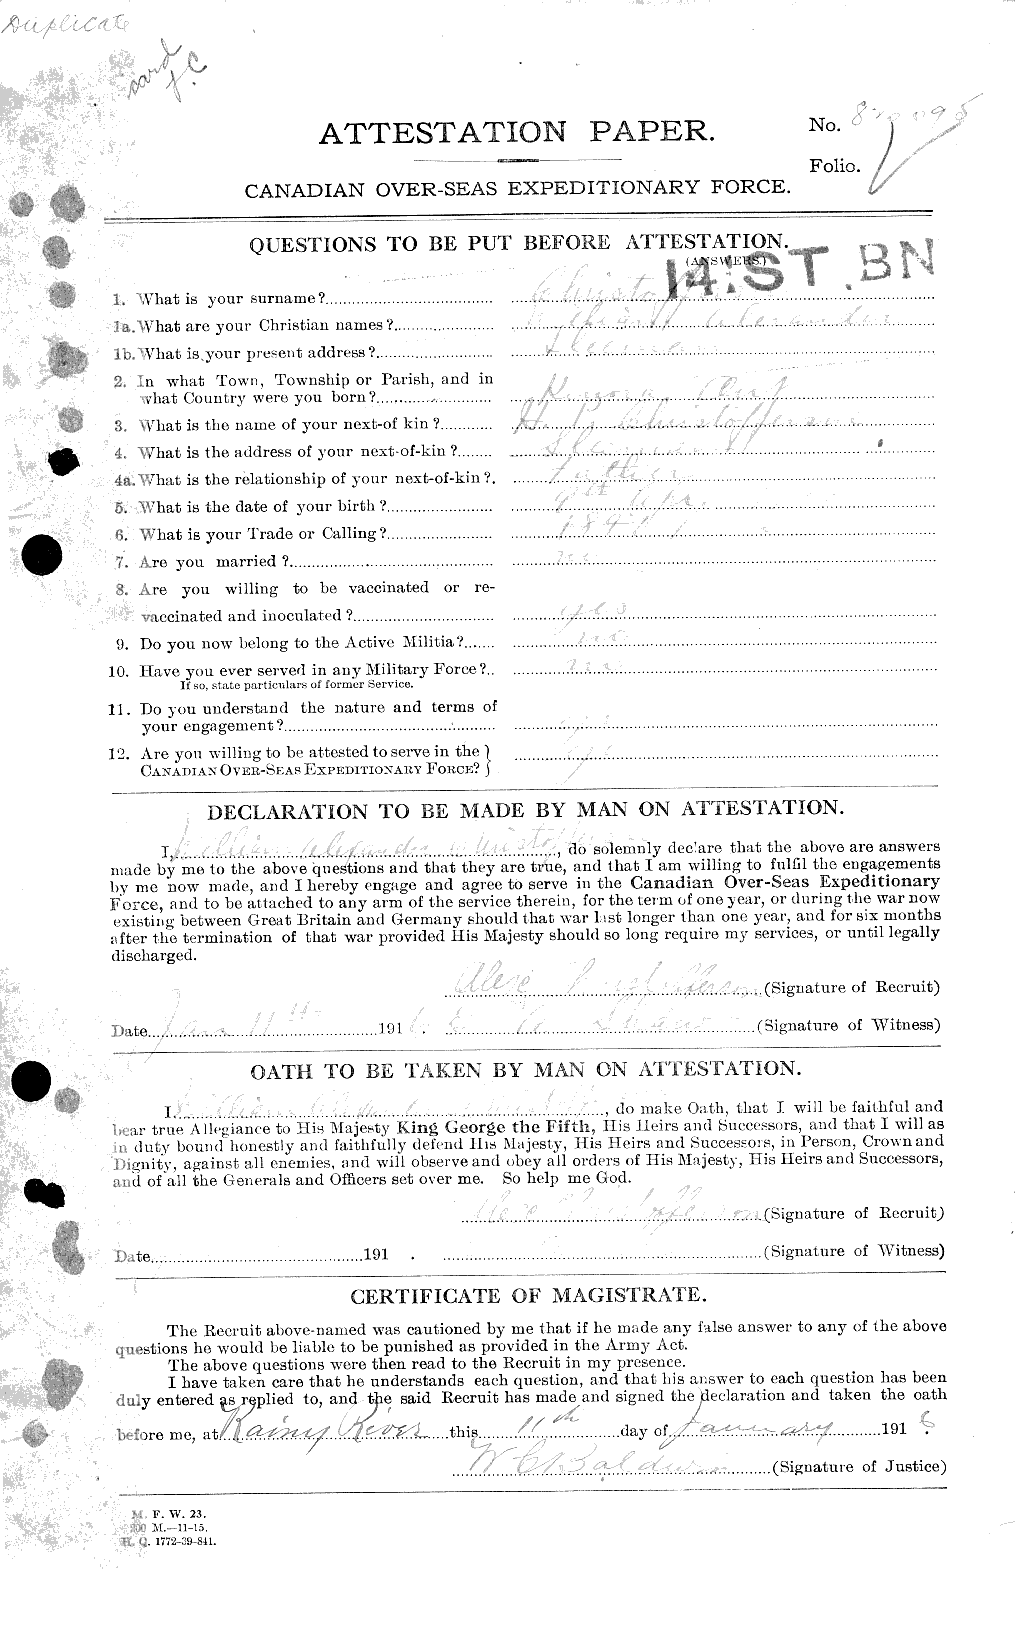 Personnel Records of the First World War - CEF 022227a